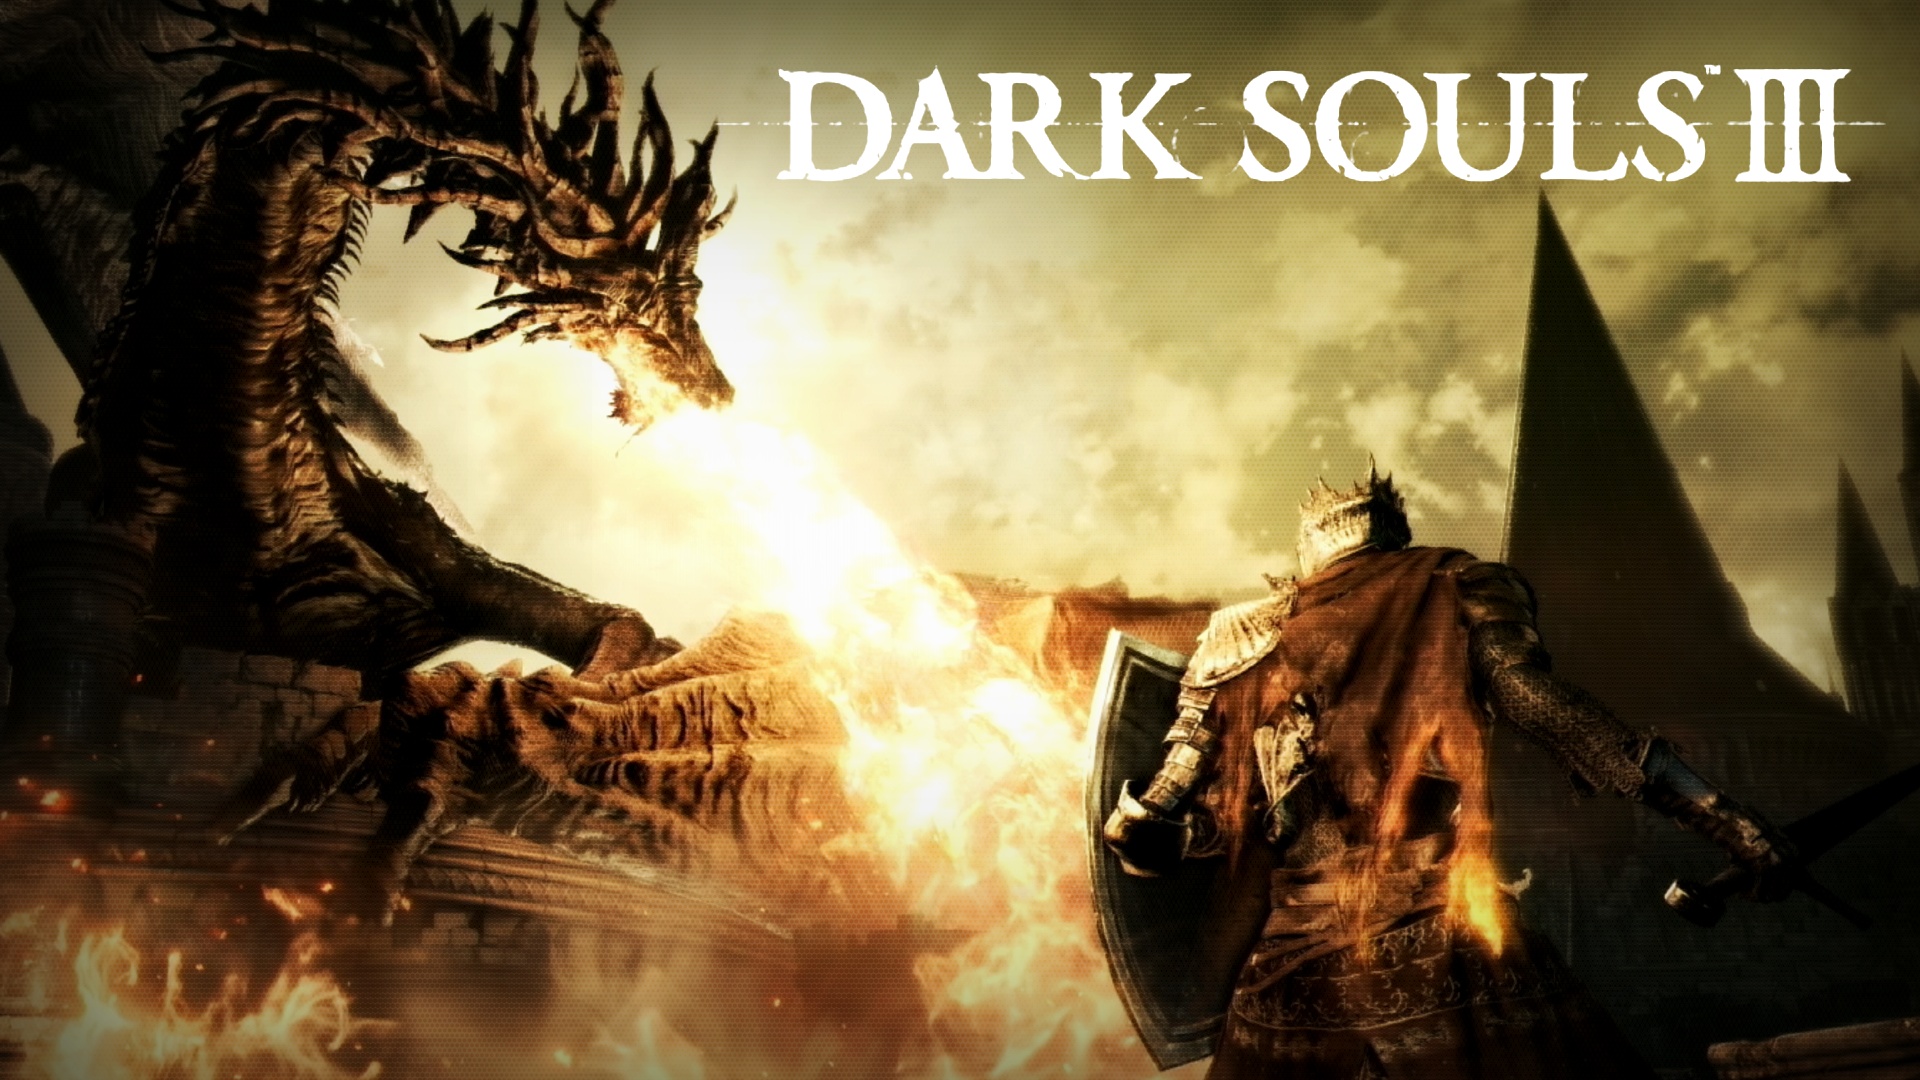 dark souls animated wallpaper,action adventure game,strategy video game,dragon,pc game,games